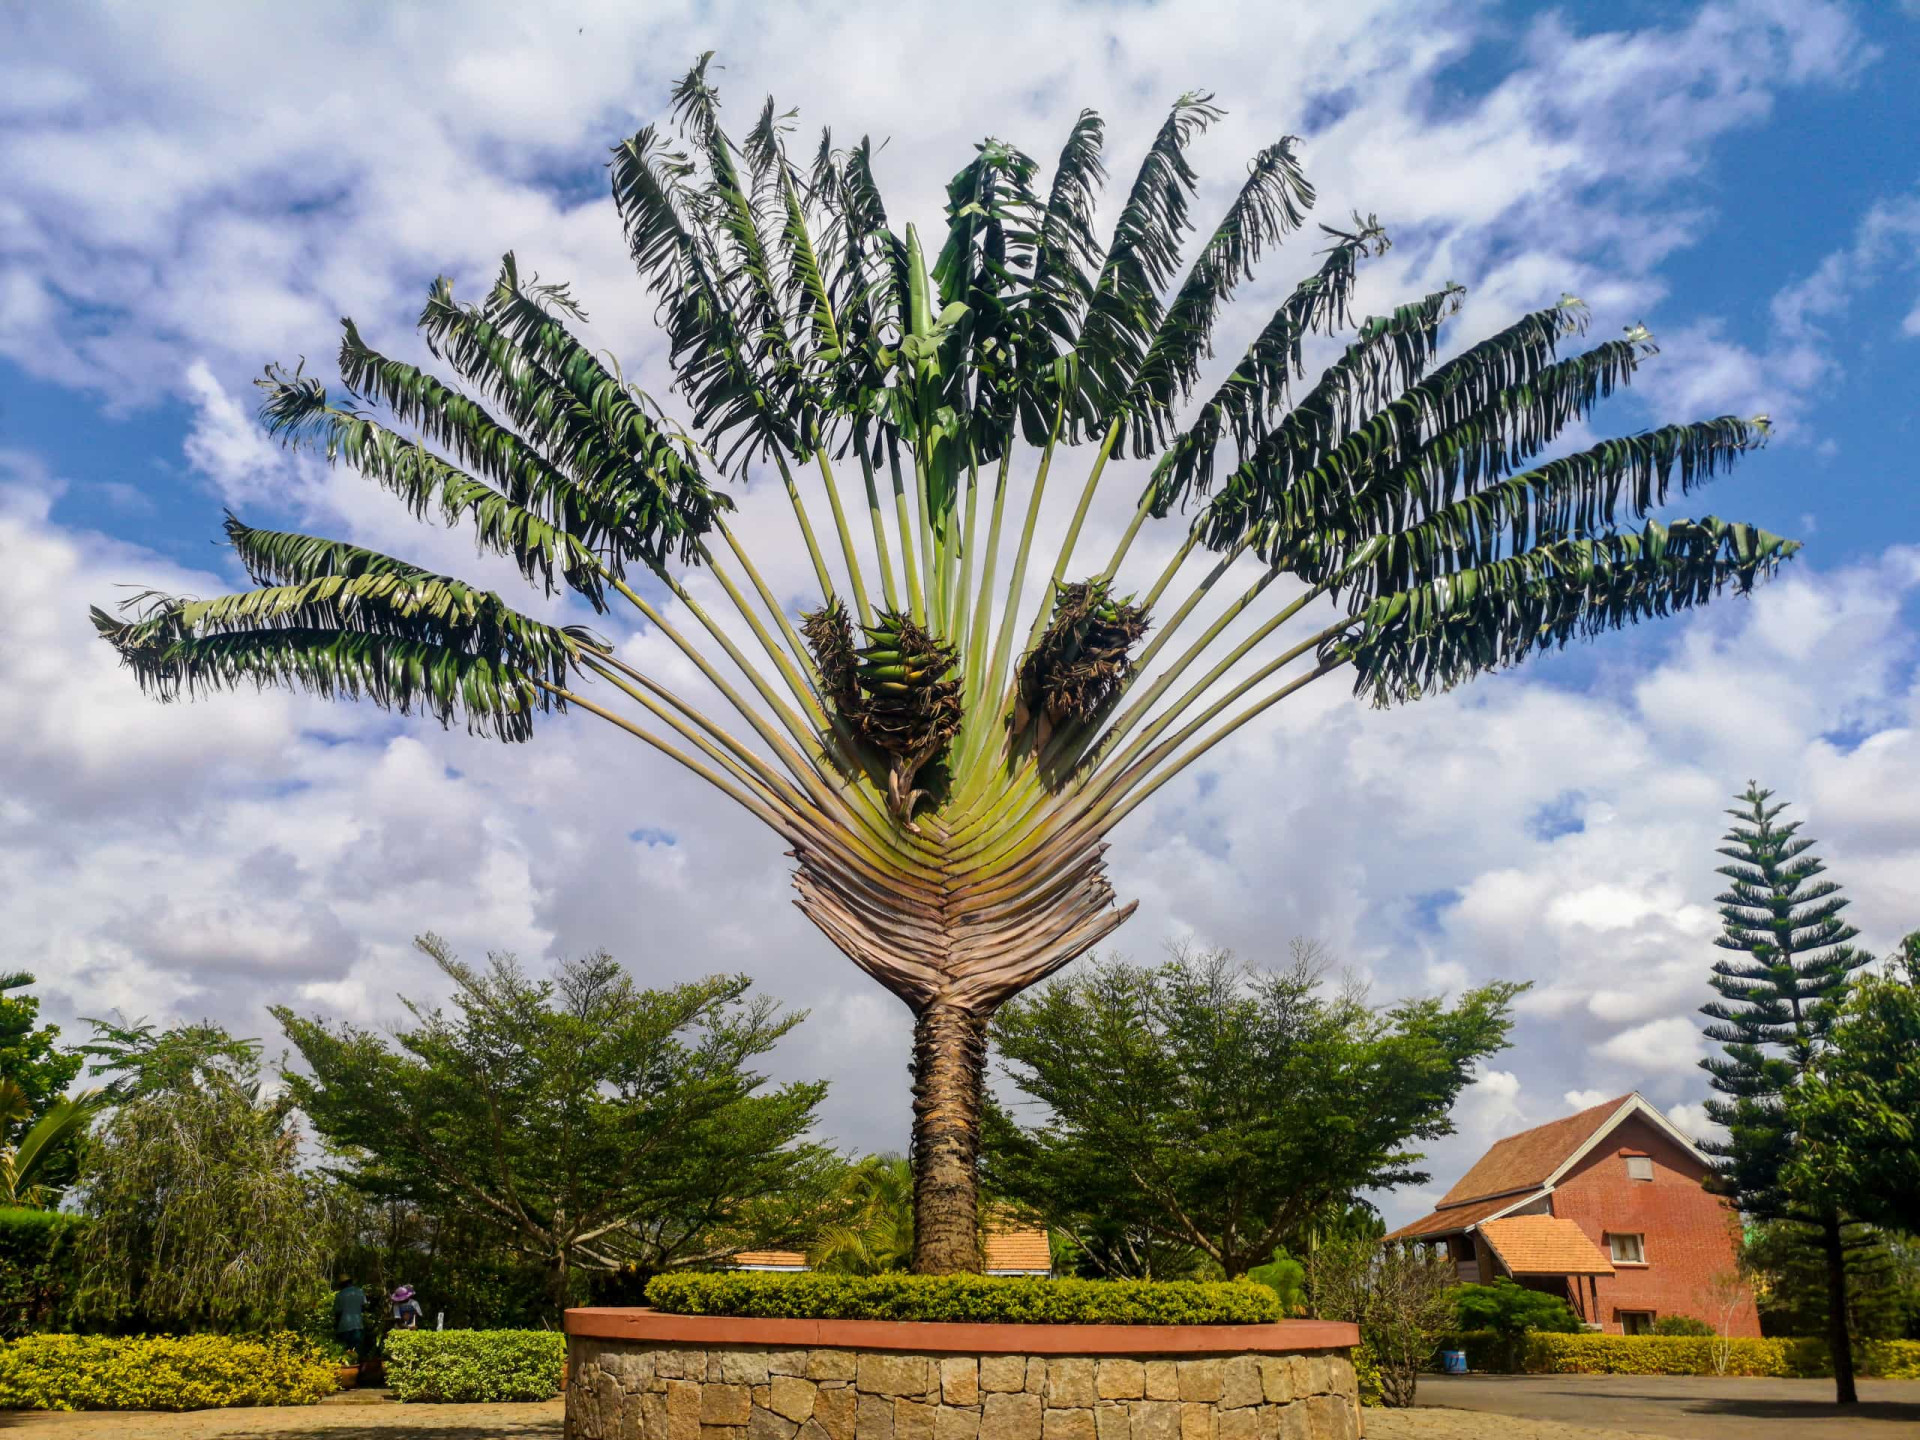 <p>This iconic flowering plant isn't a true palm, although it's referred to as traveler's palm.</p><p>You may also like:<a href="https://www.starsinsider.com/n/458629?utm_source=msn.com&utm_medium=display&utm_campaign=referral_description&utm_content=265328v11en-us"> Actors you didn't realize were also child actors</a></p>